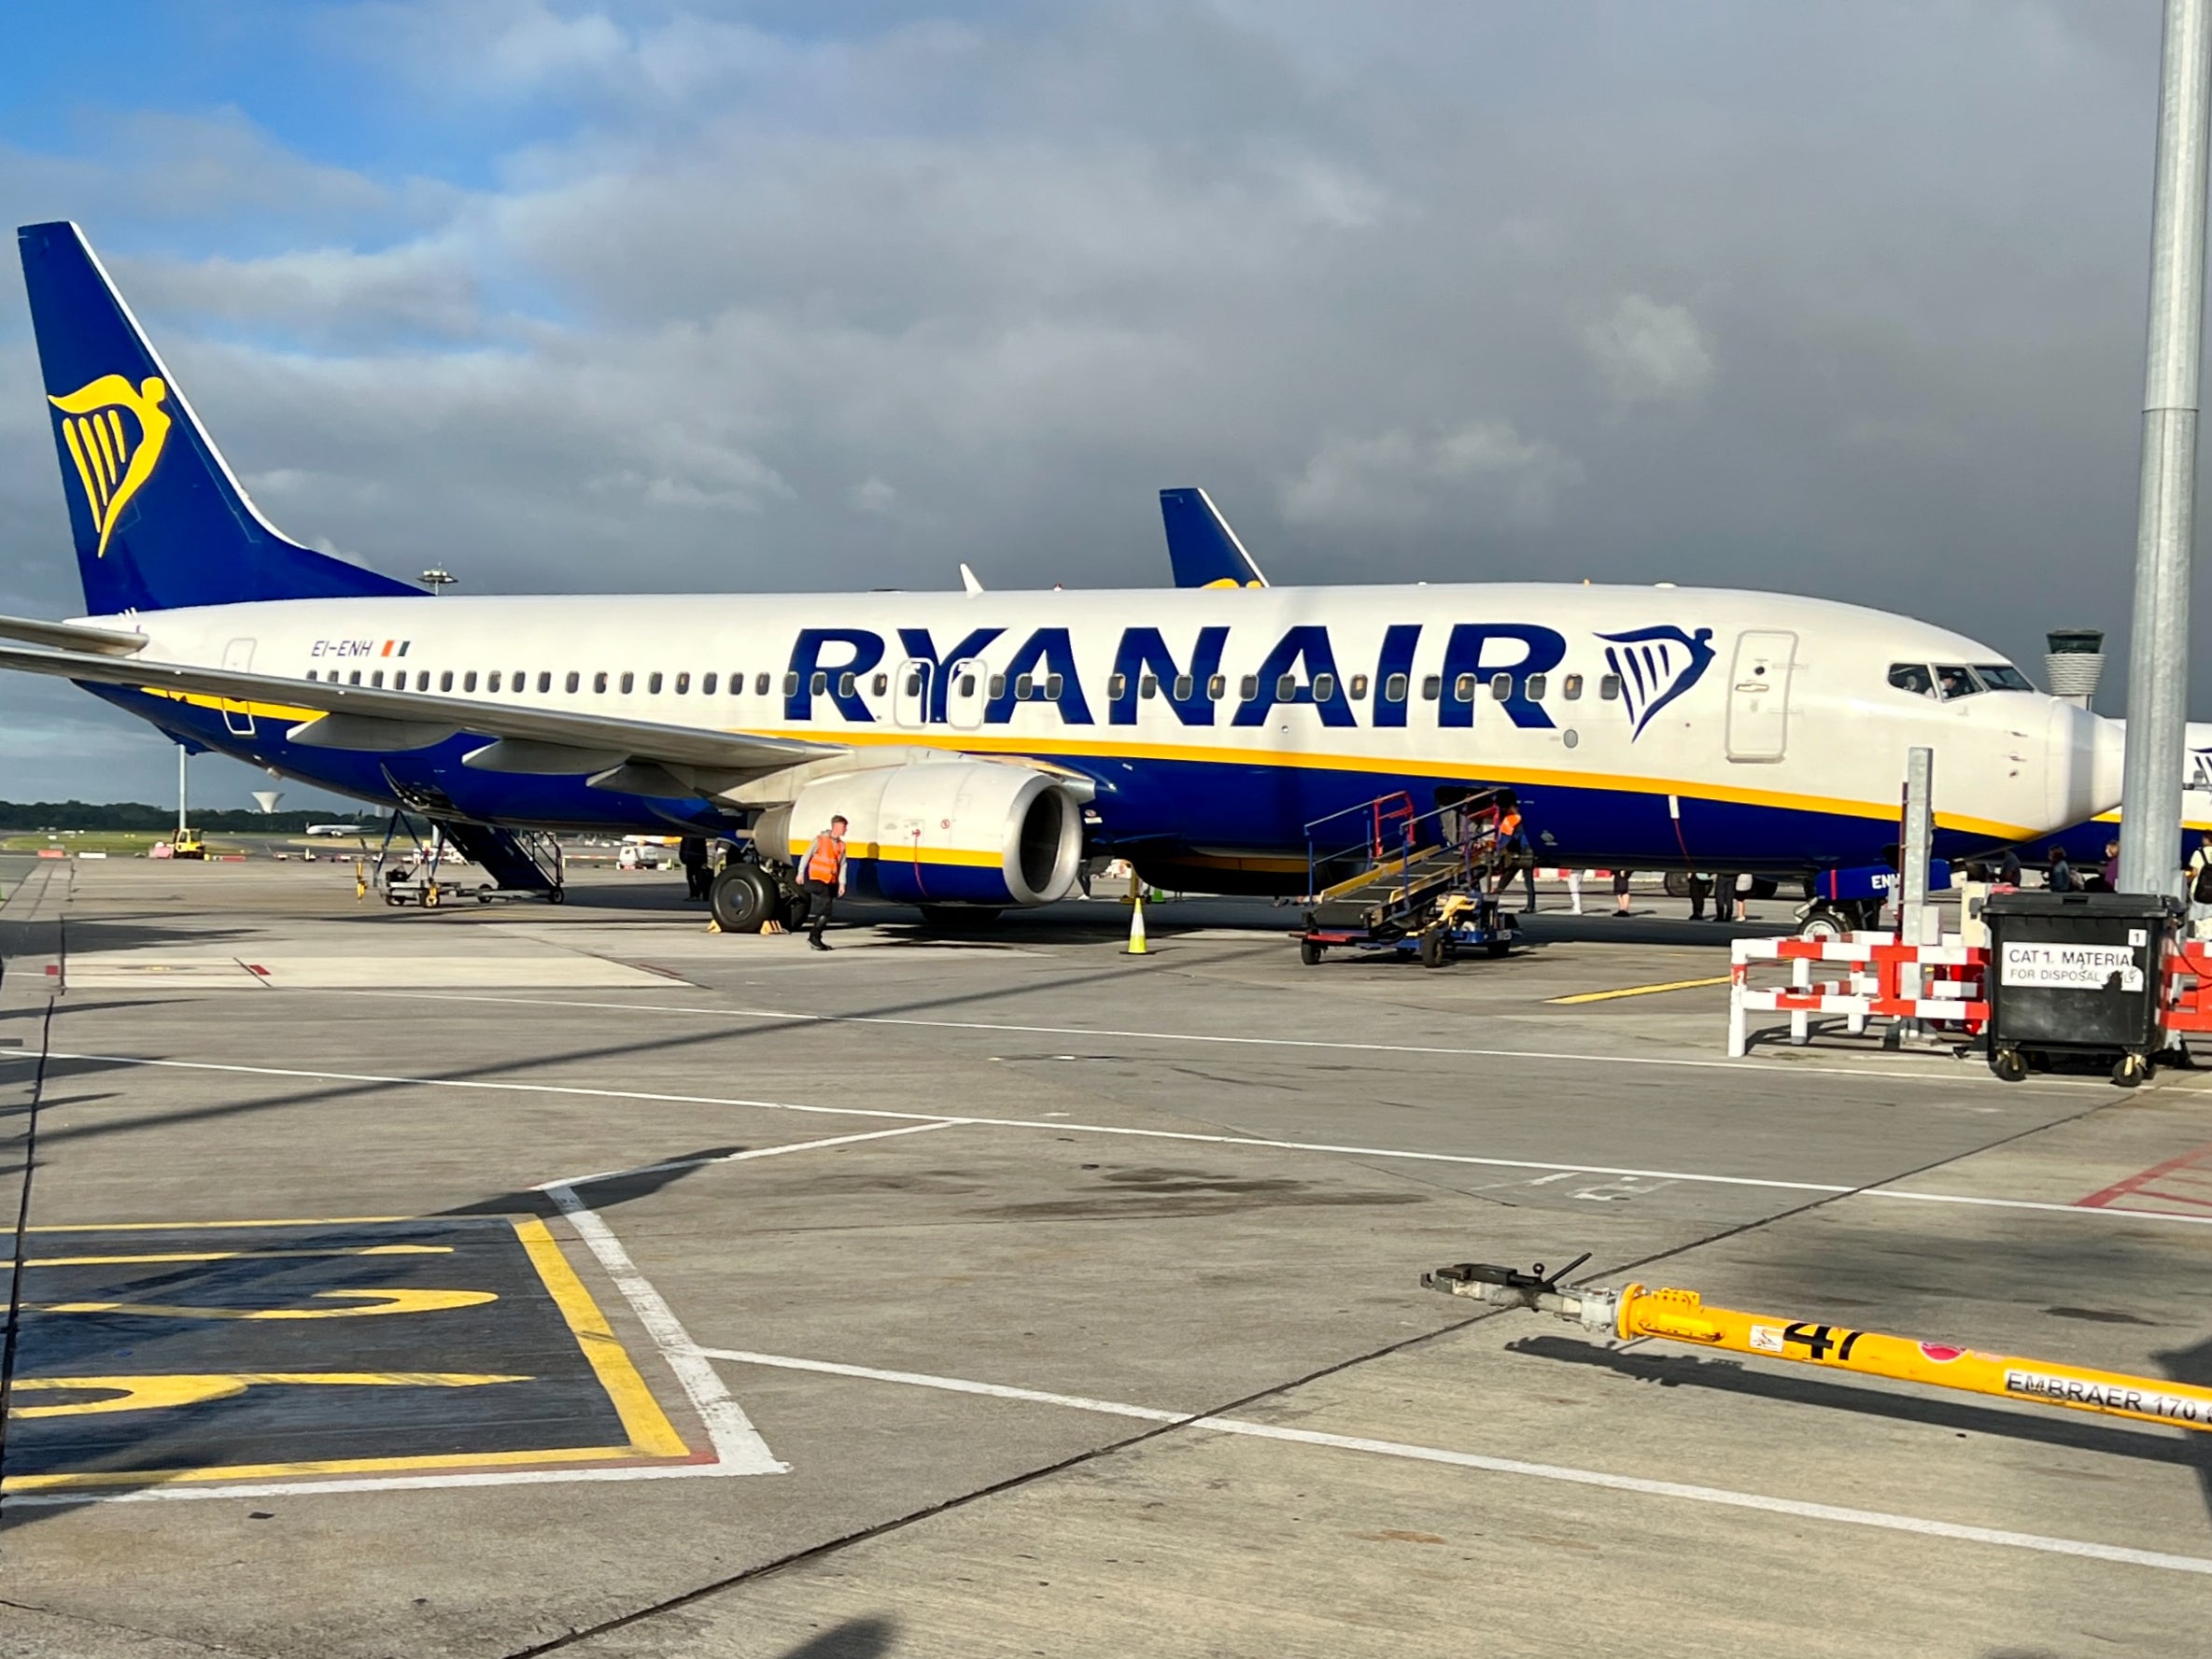 Bold plans: Ryanair expects to fly 225 million passengers by 2025